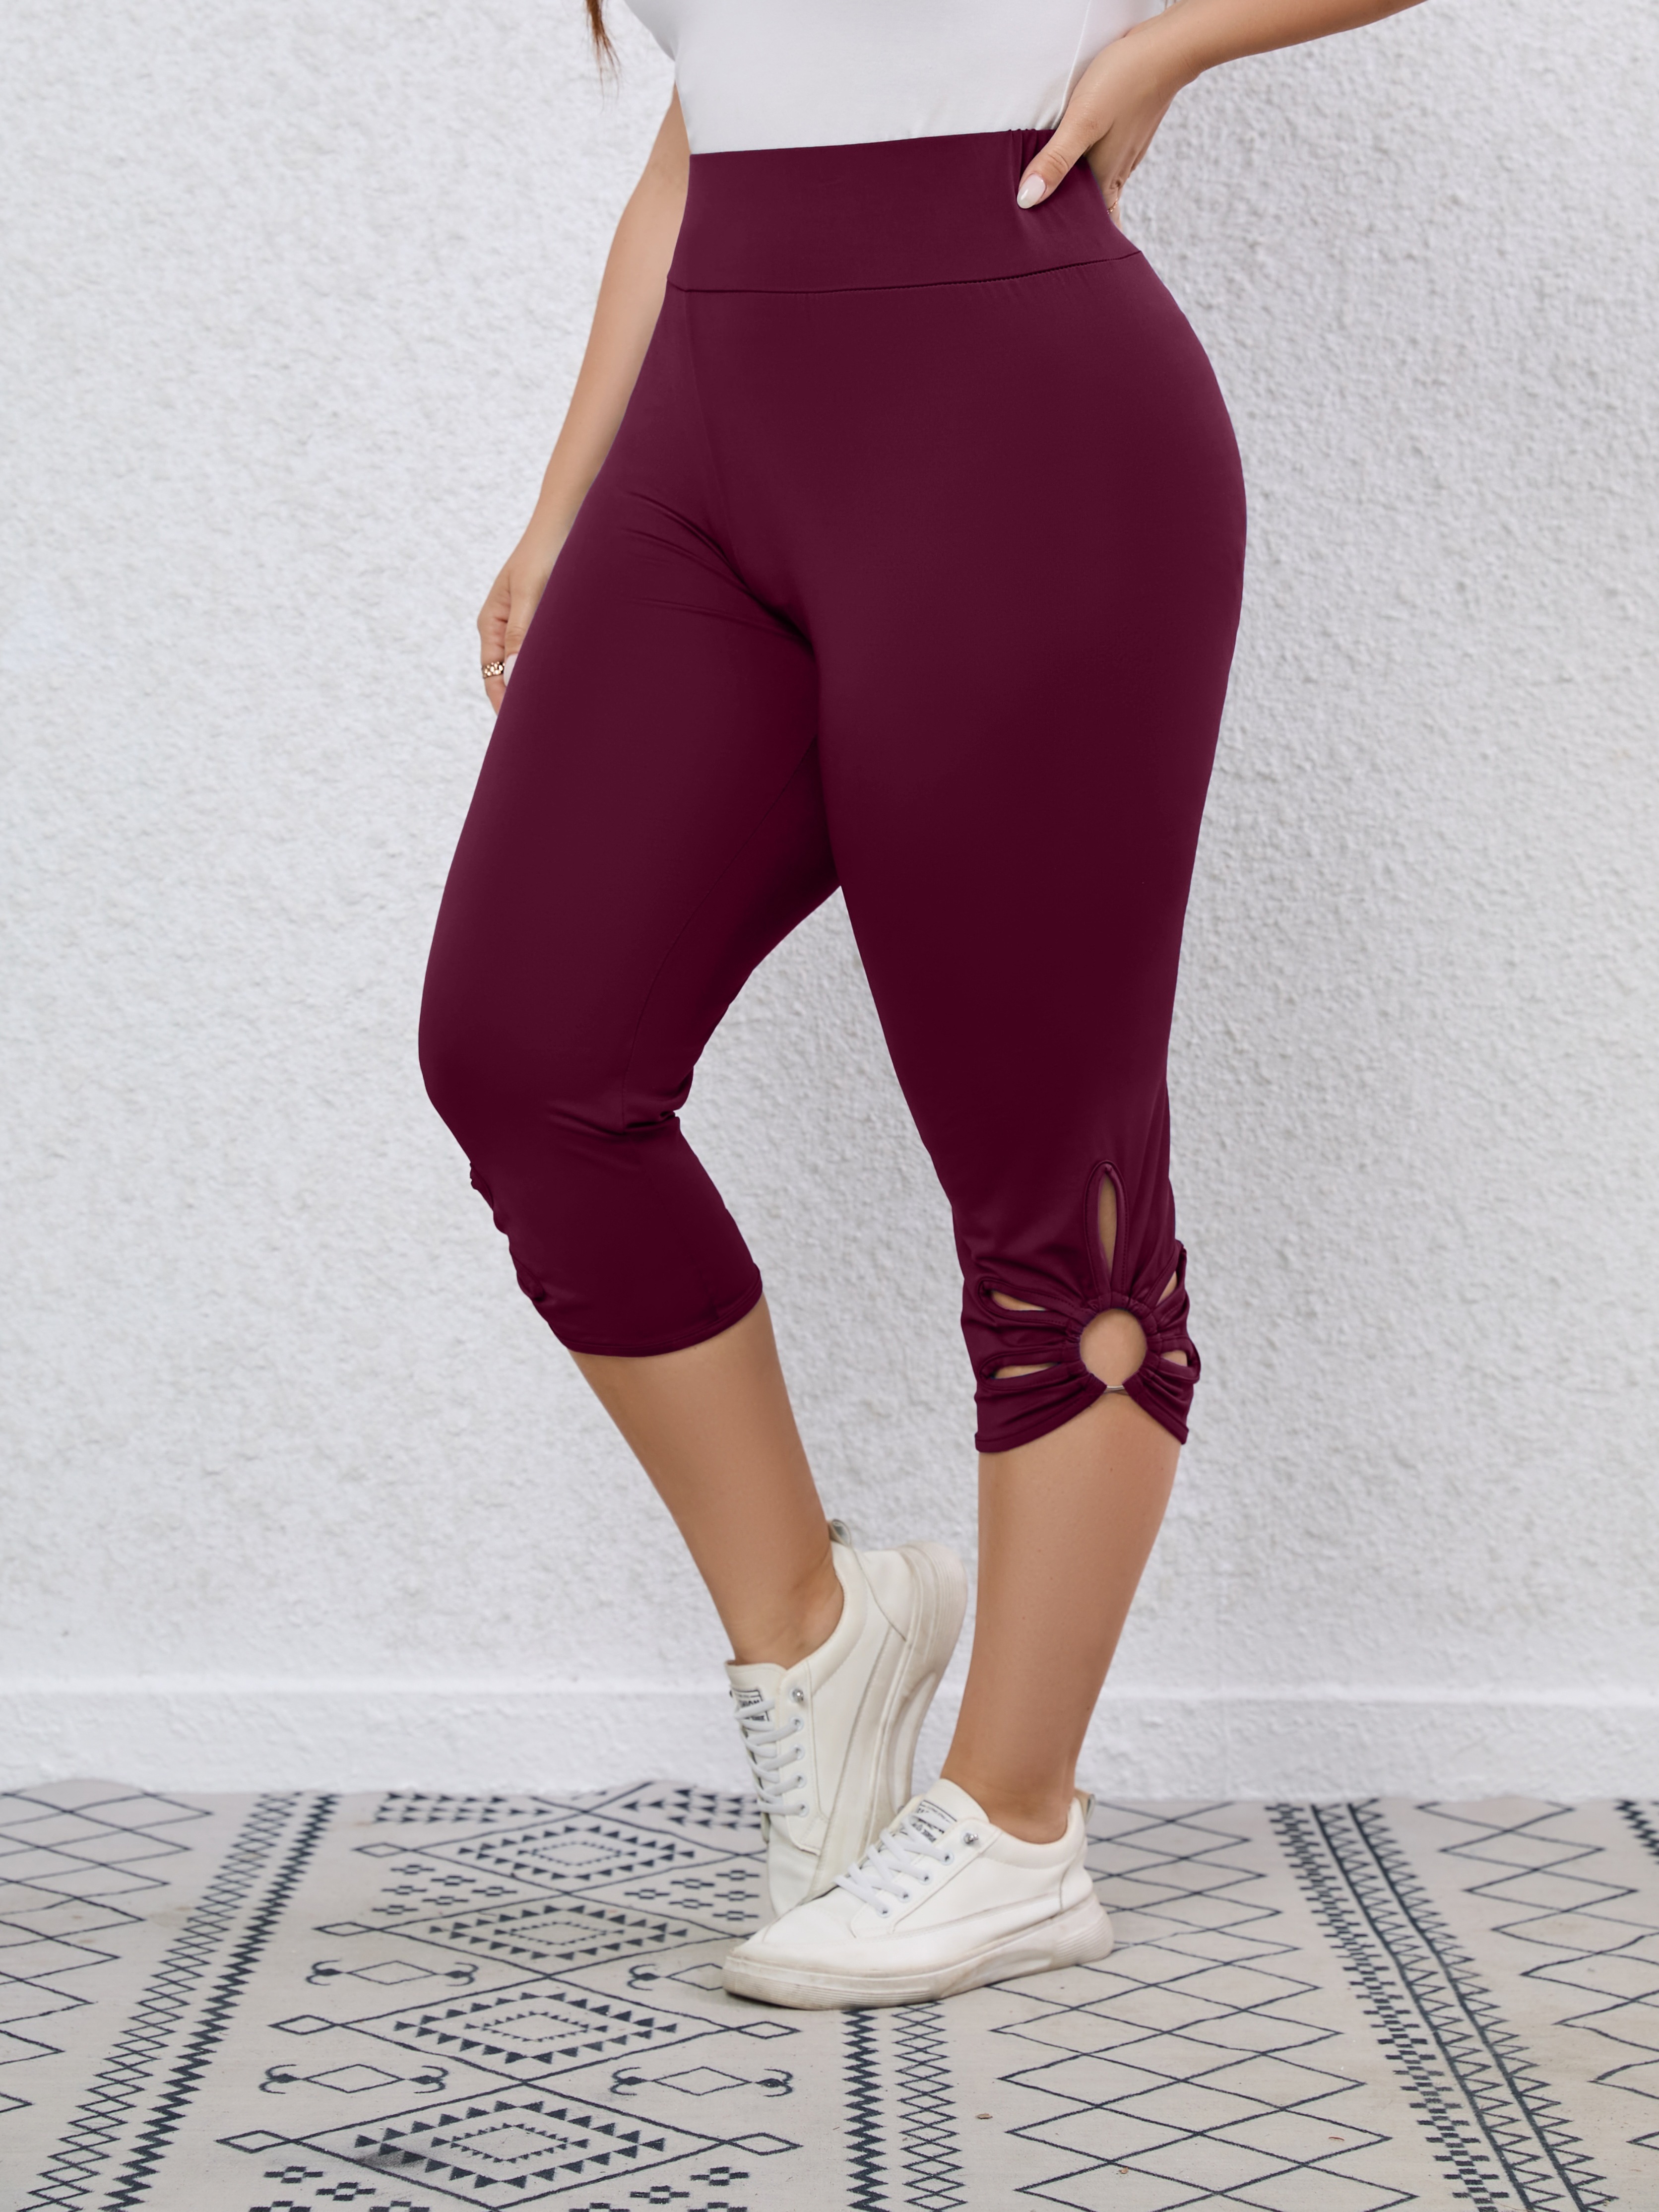 Women's Casual Ankle Length Leggings (One Size, Pink) 